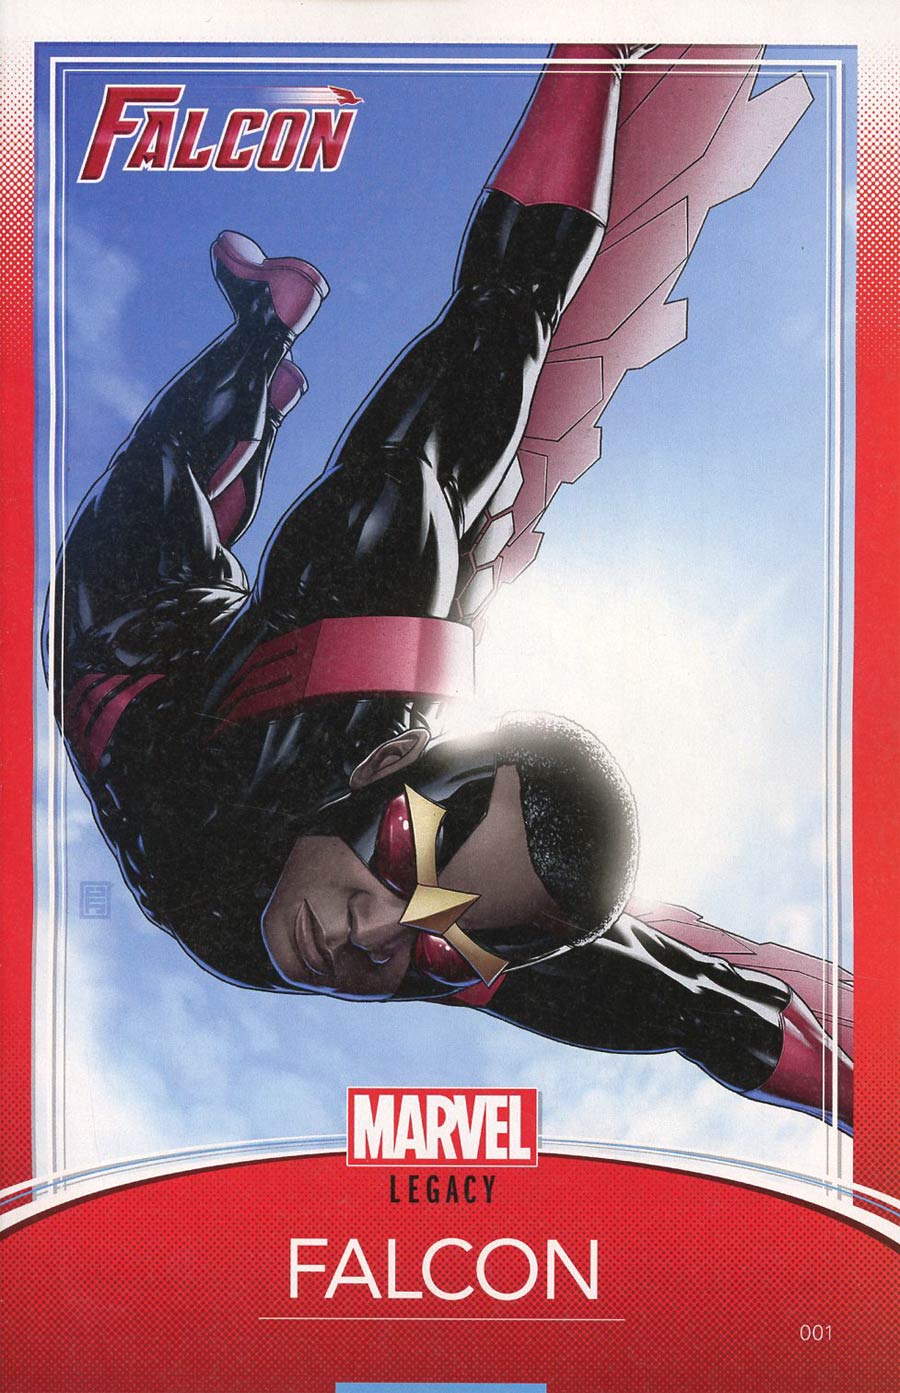 Falcon Vol 2 #1 Cover C Variant John Tyler Christopher Trading Card Cover (Marvel Legacy Tie-In)